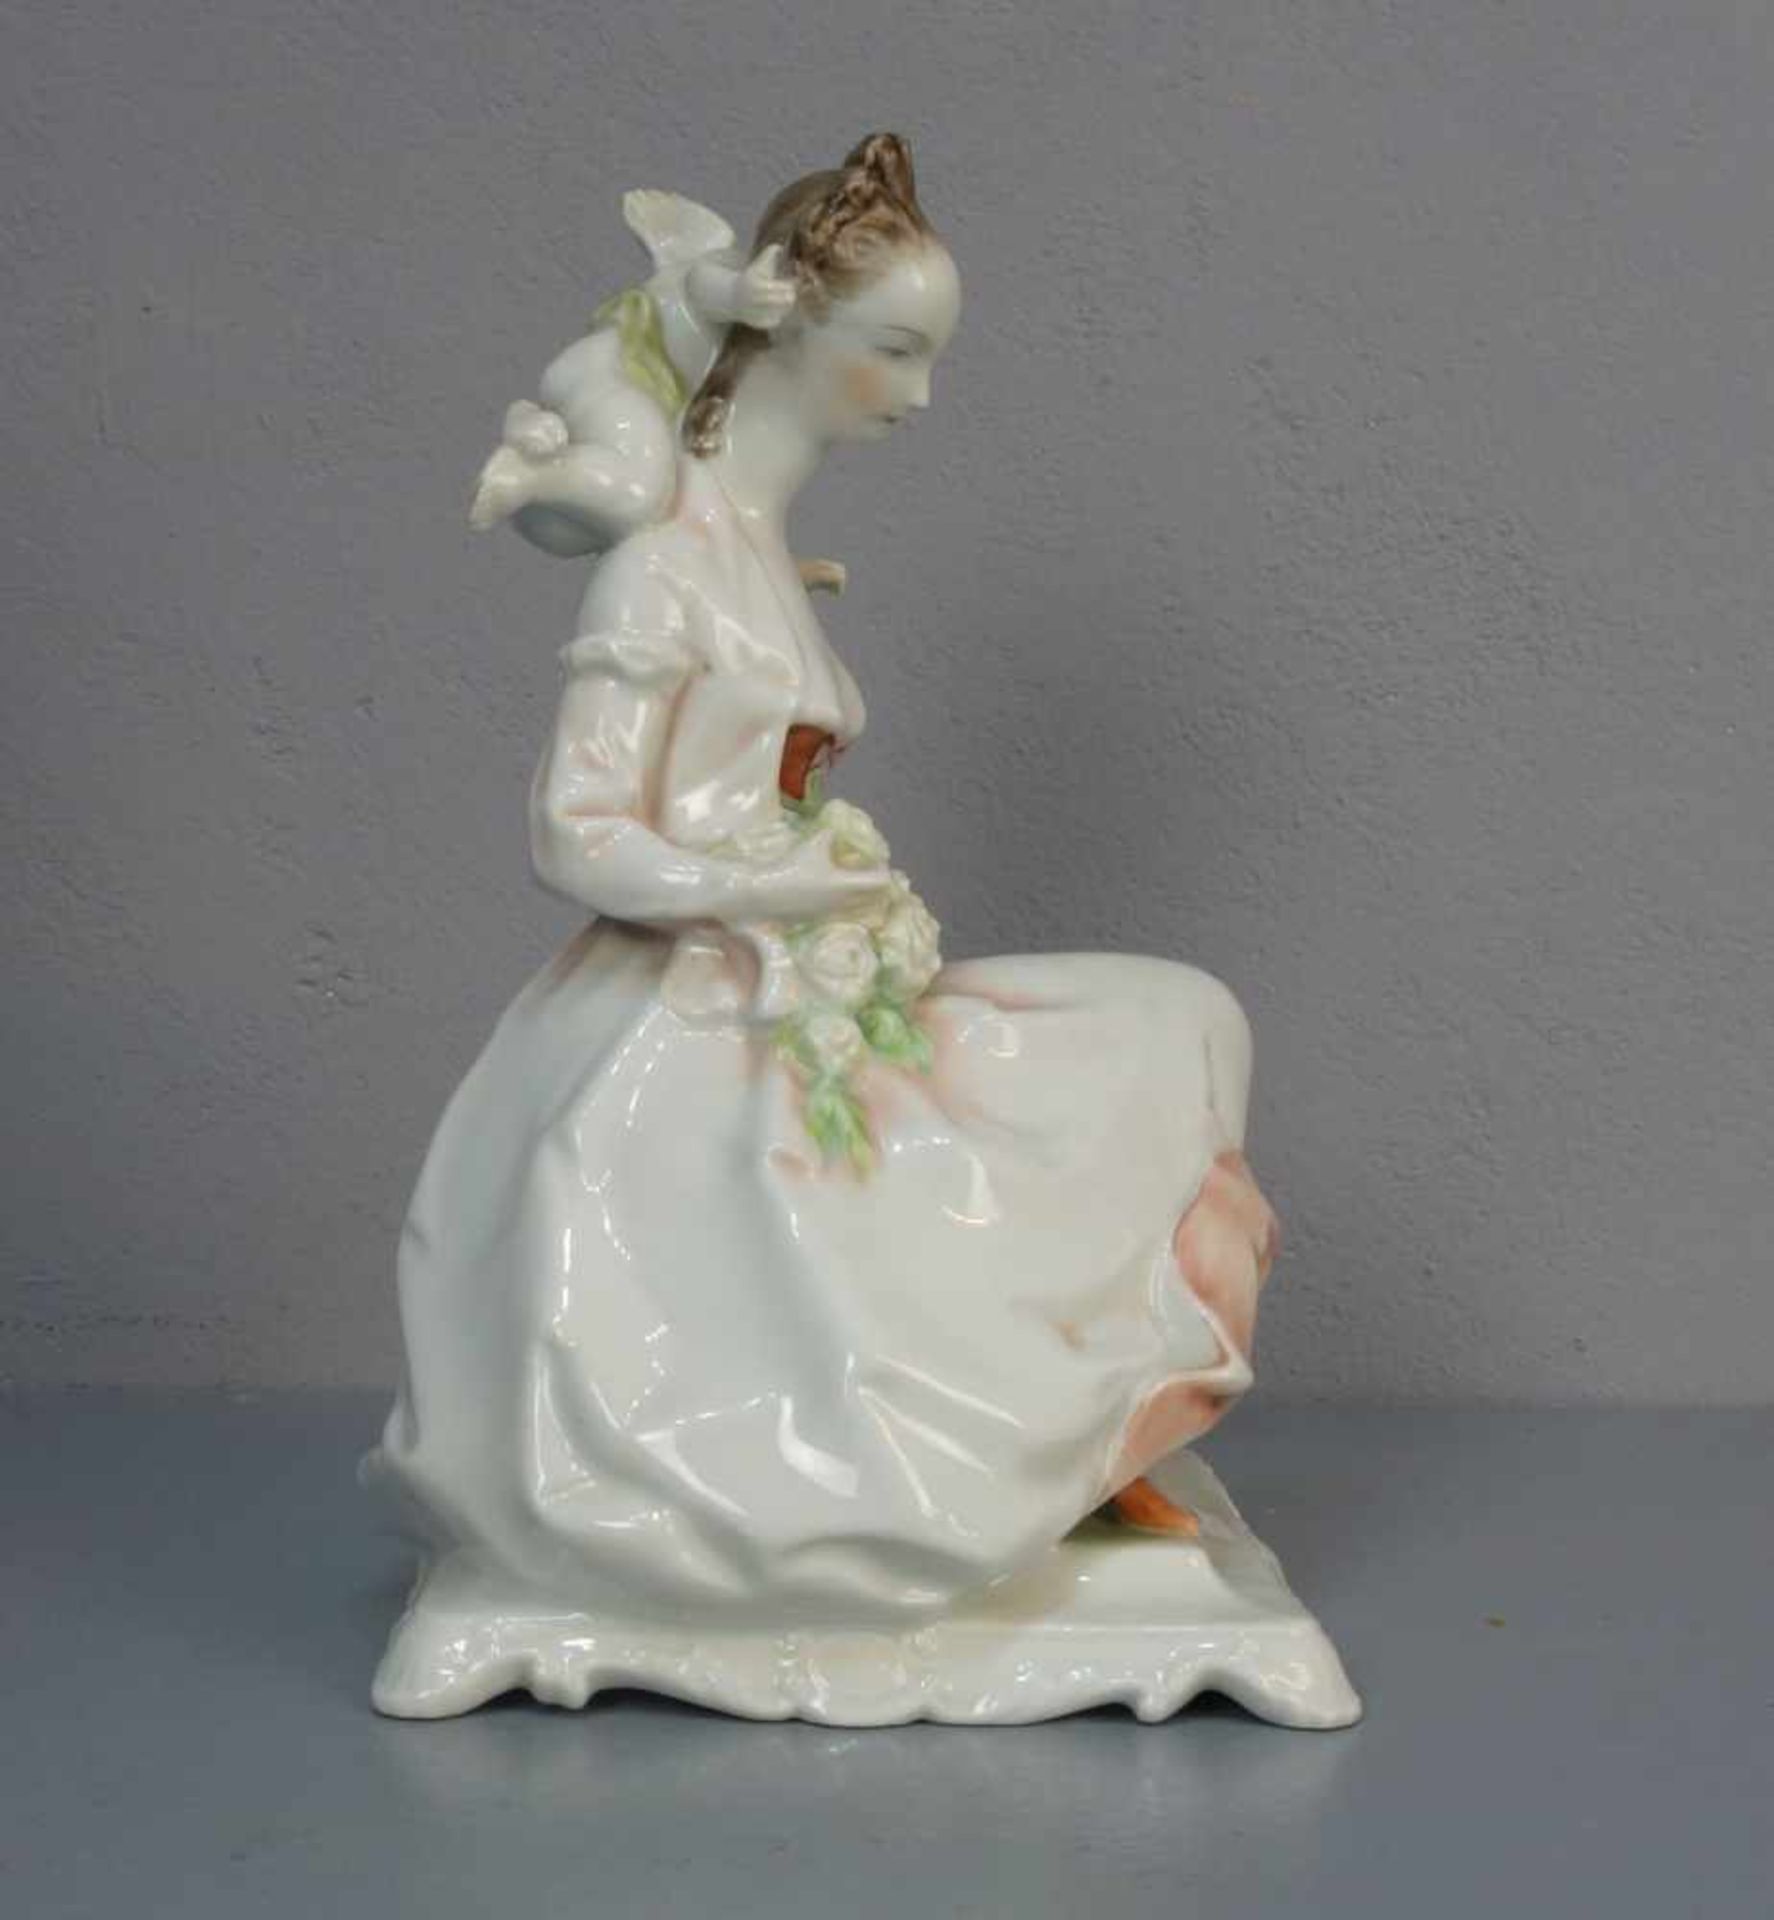 FIGURENGRUPPE "Frau mit Blumenstrauß und Amorette" / porcelain figure: "Woman with flowers and - Image 4 of 5